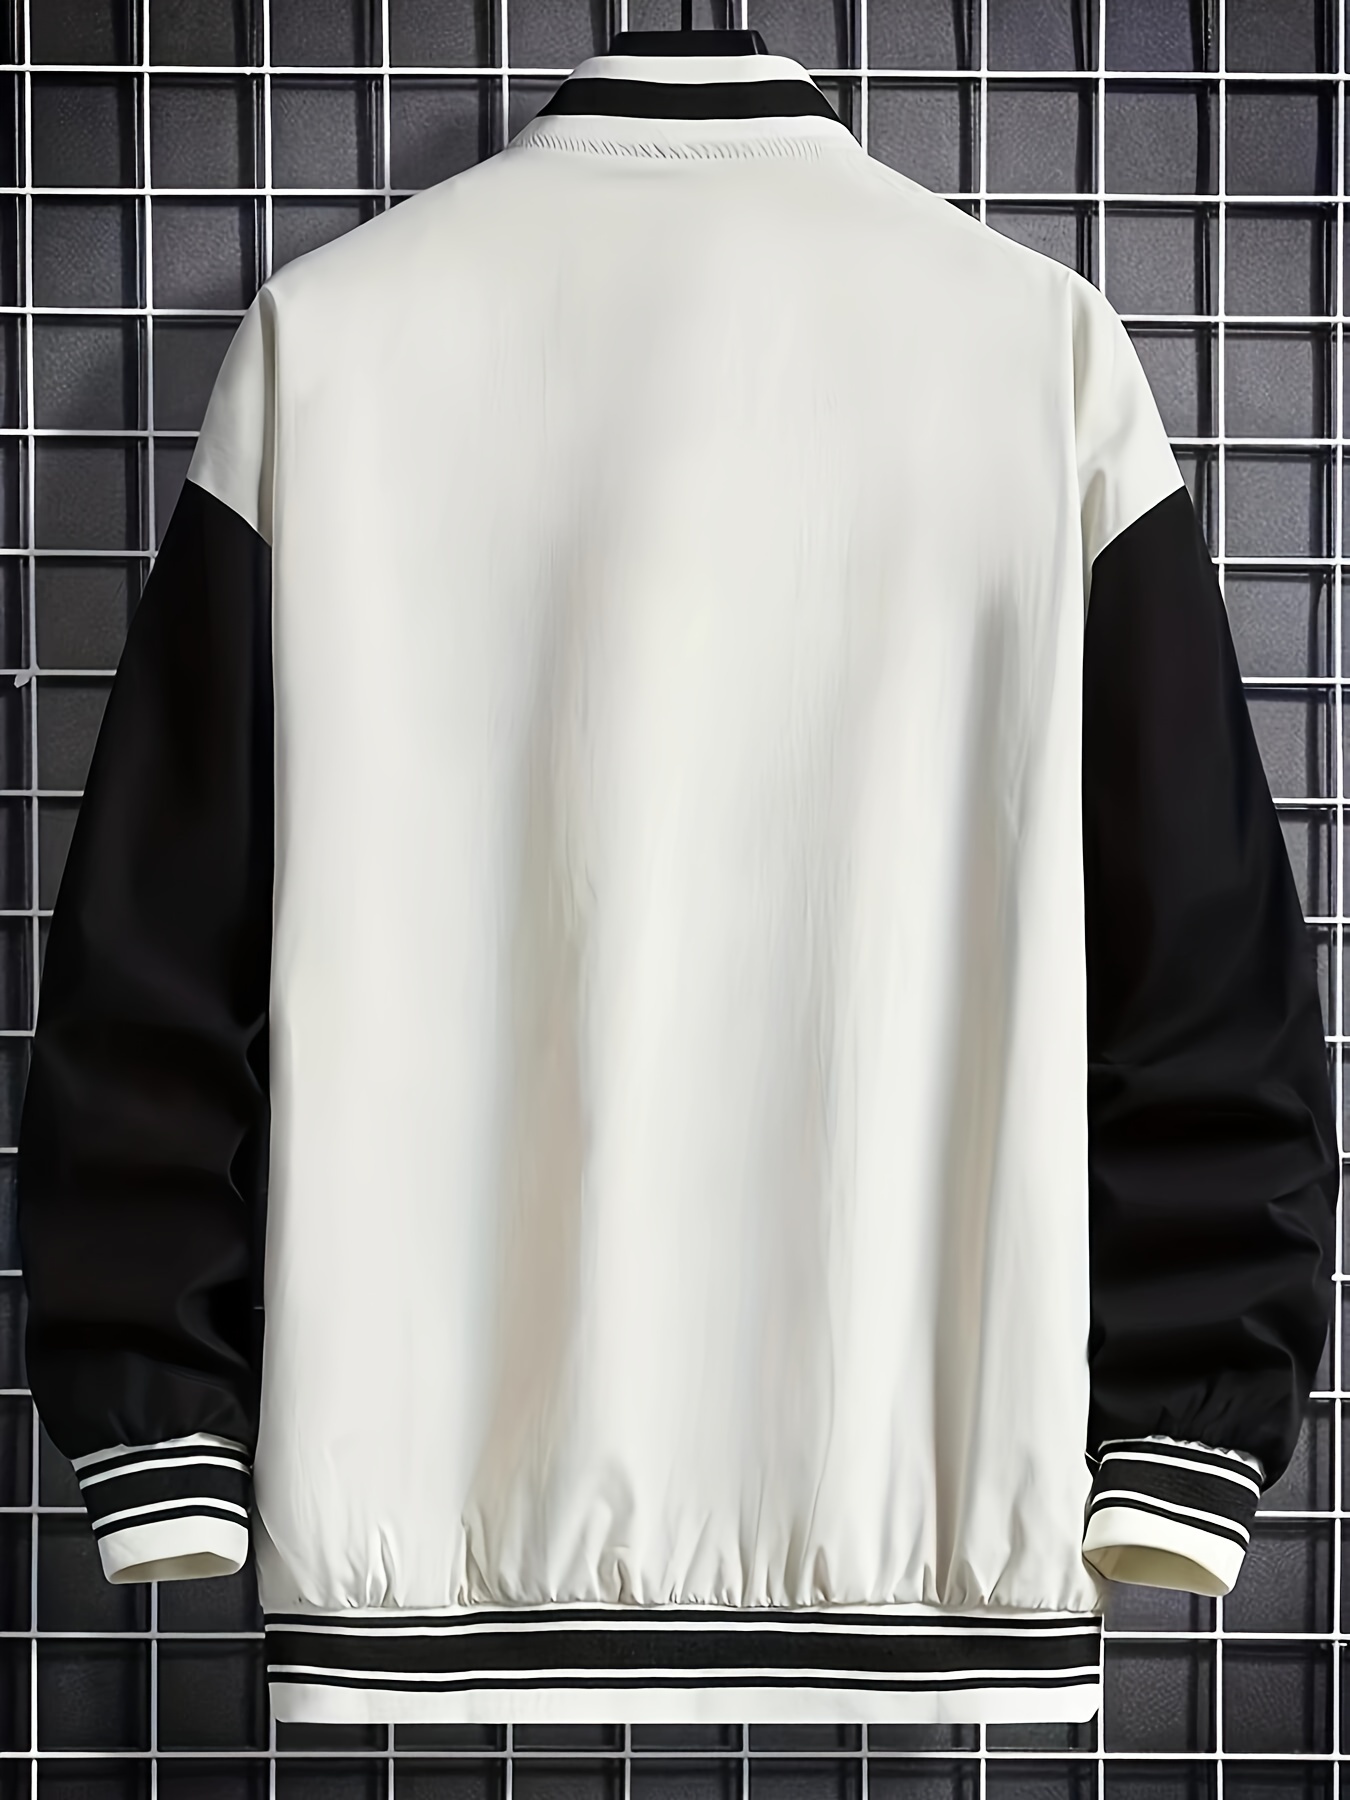 Embroidery Varsity Jacket, Men's Casual Color Block Button Up